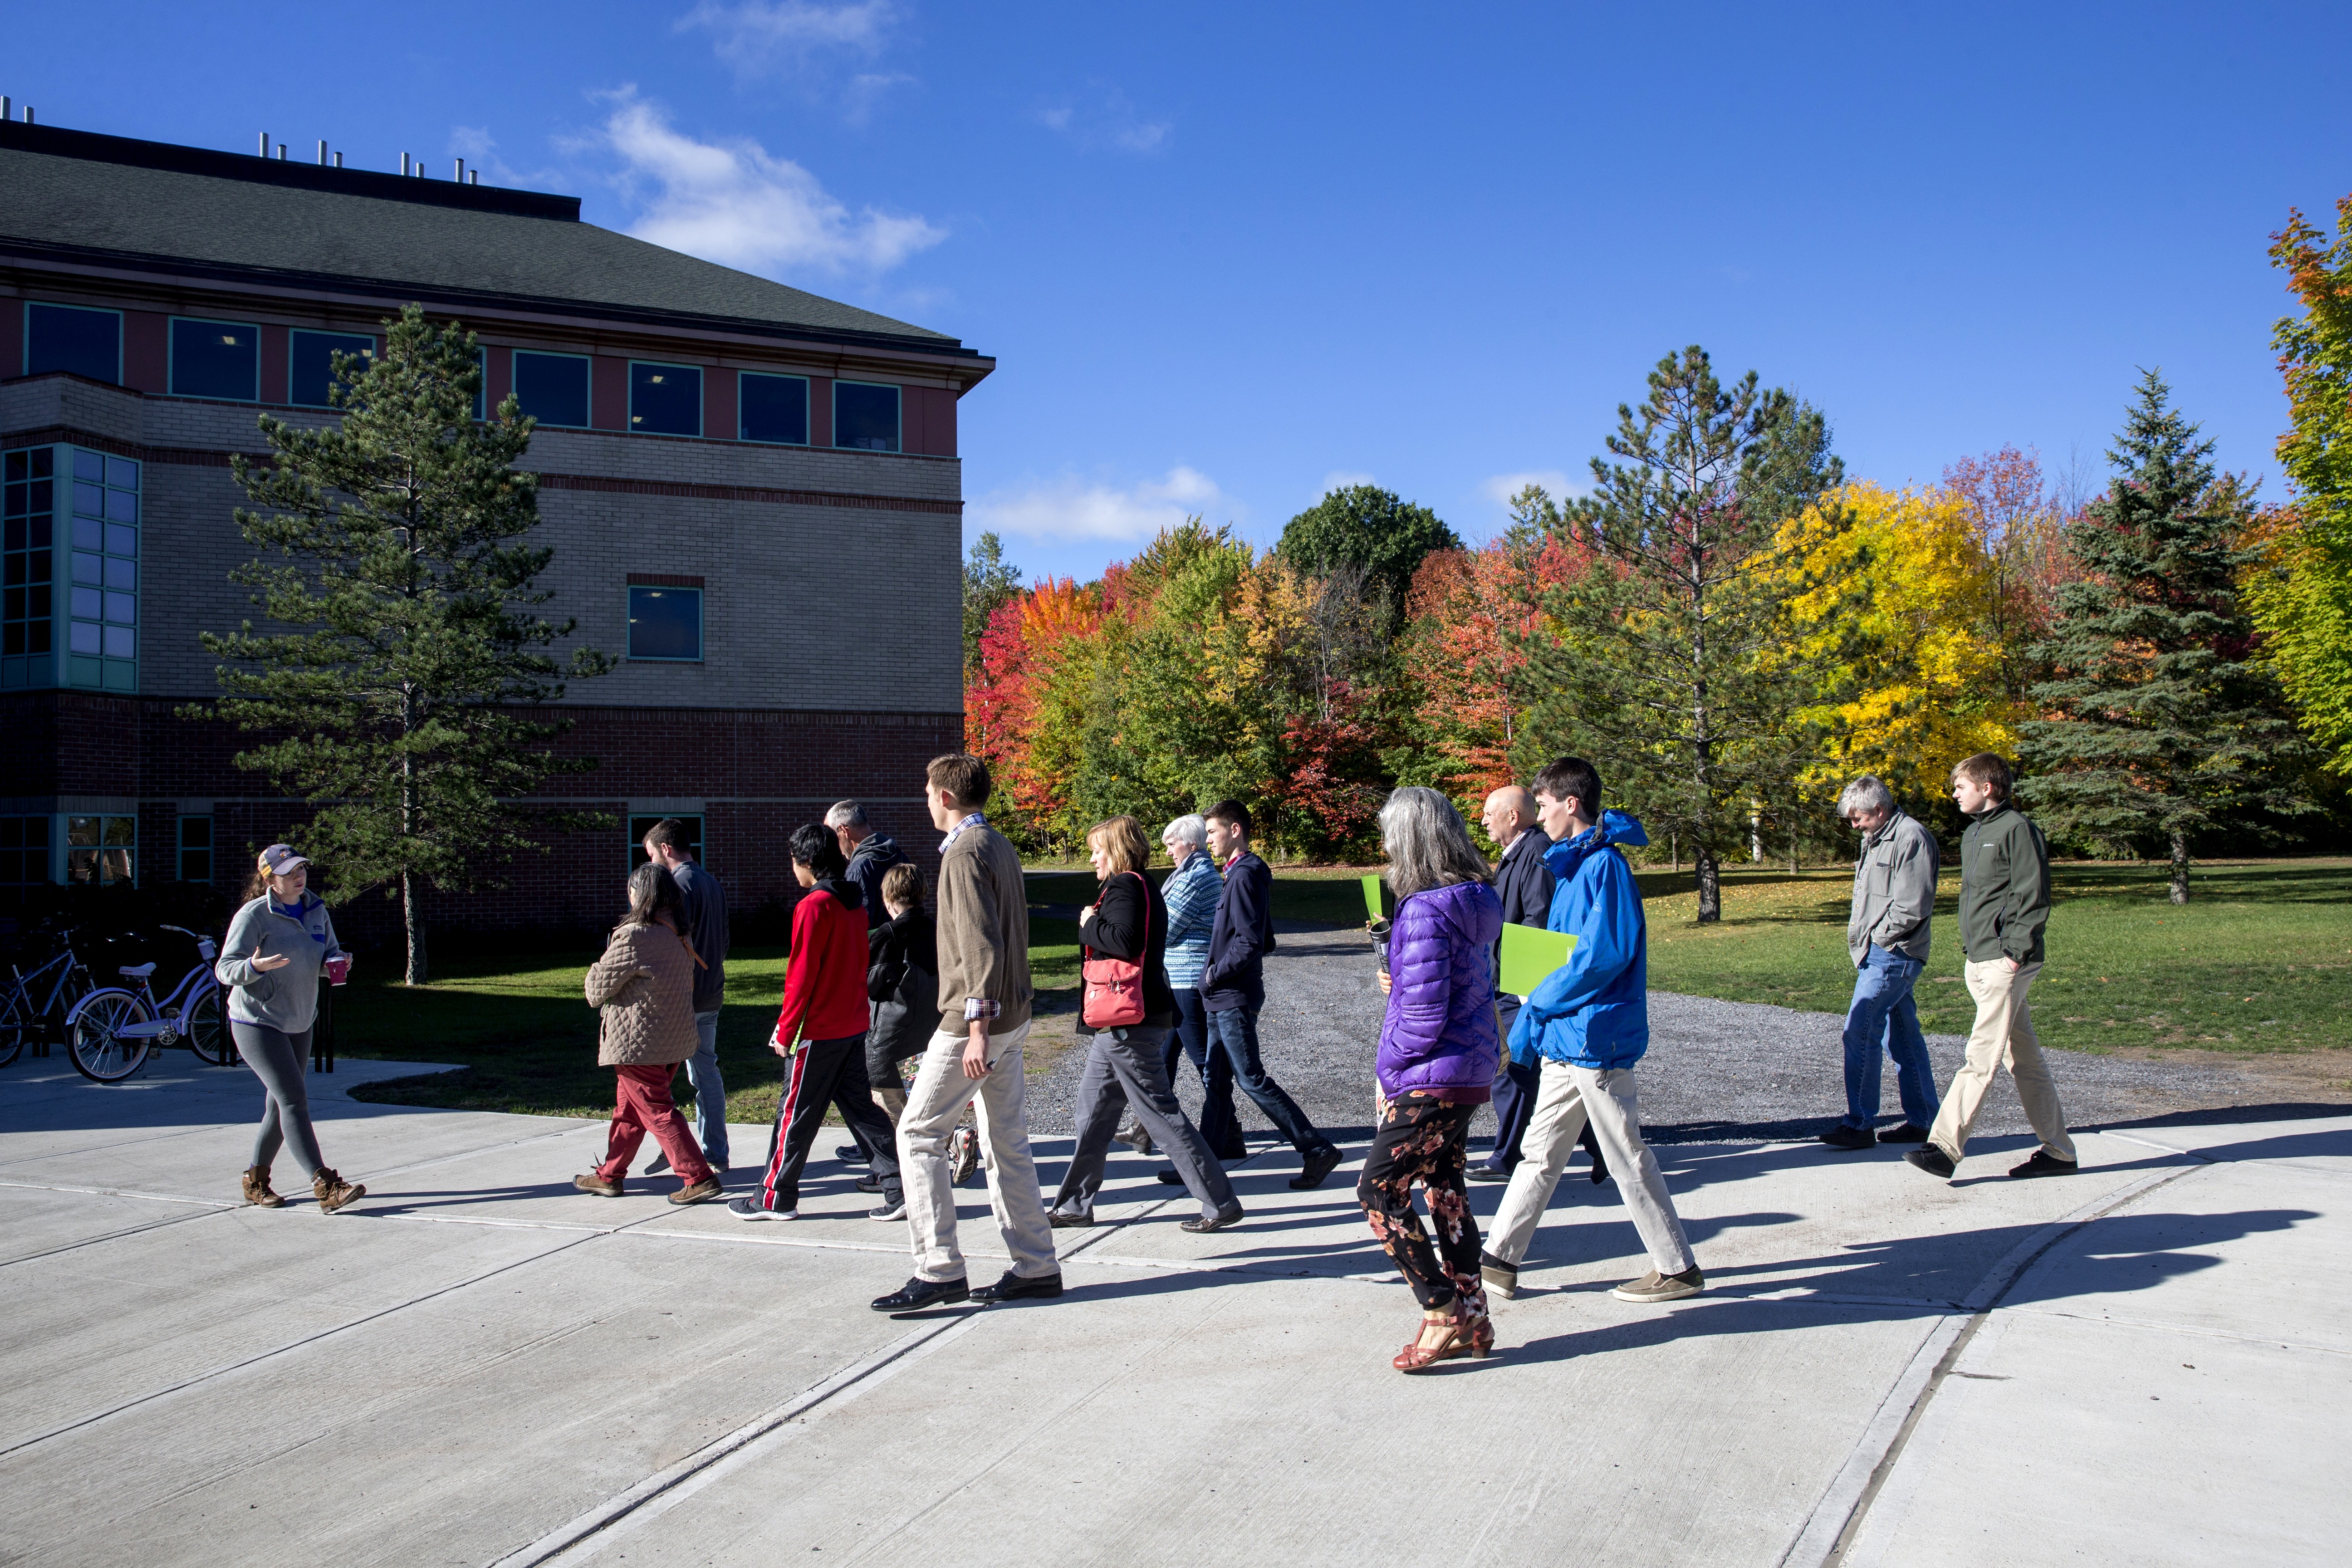 A group of students walking along a path with a building in the background and colorful trees of red, green, and yellow